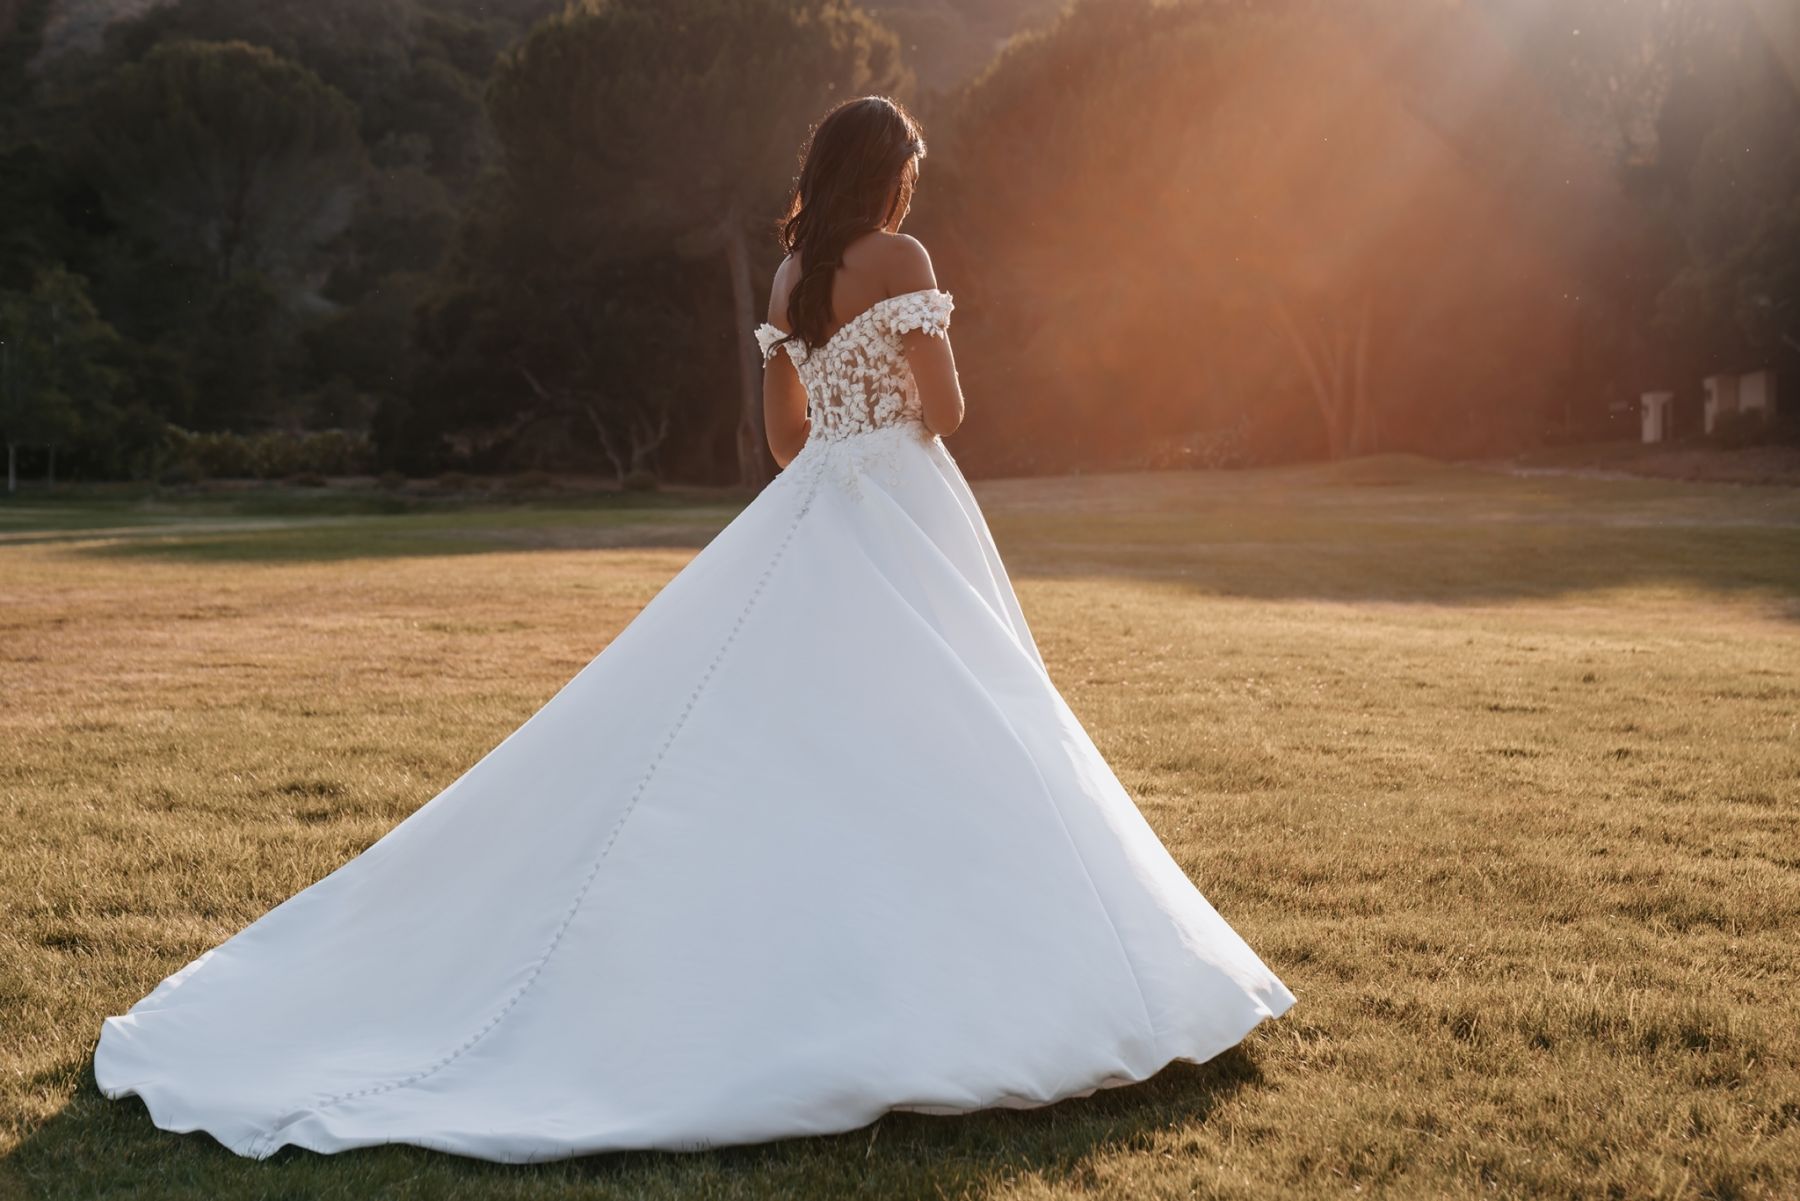 Allure Bridals Style 9908